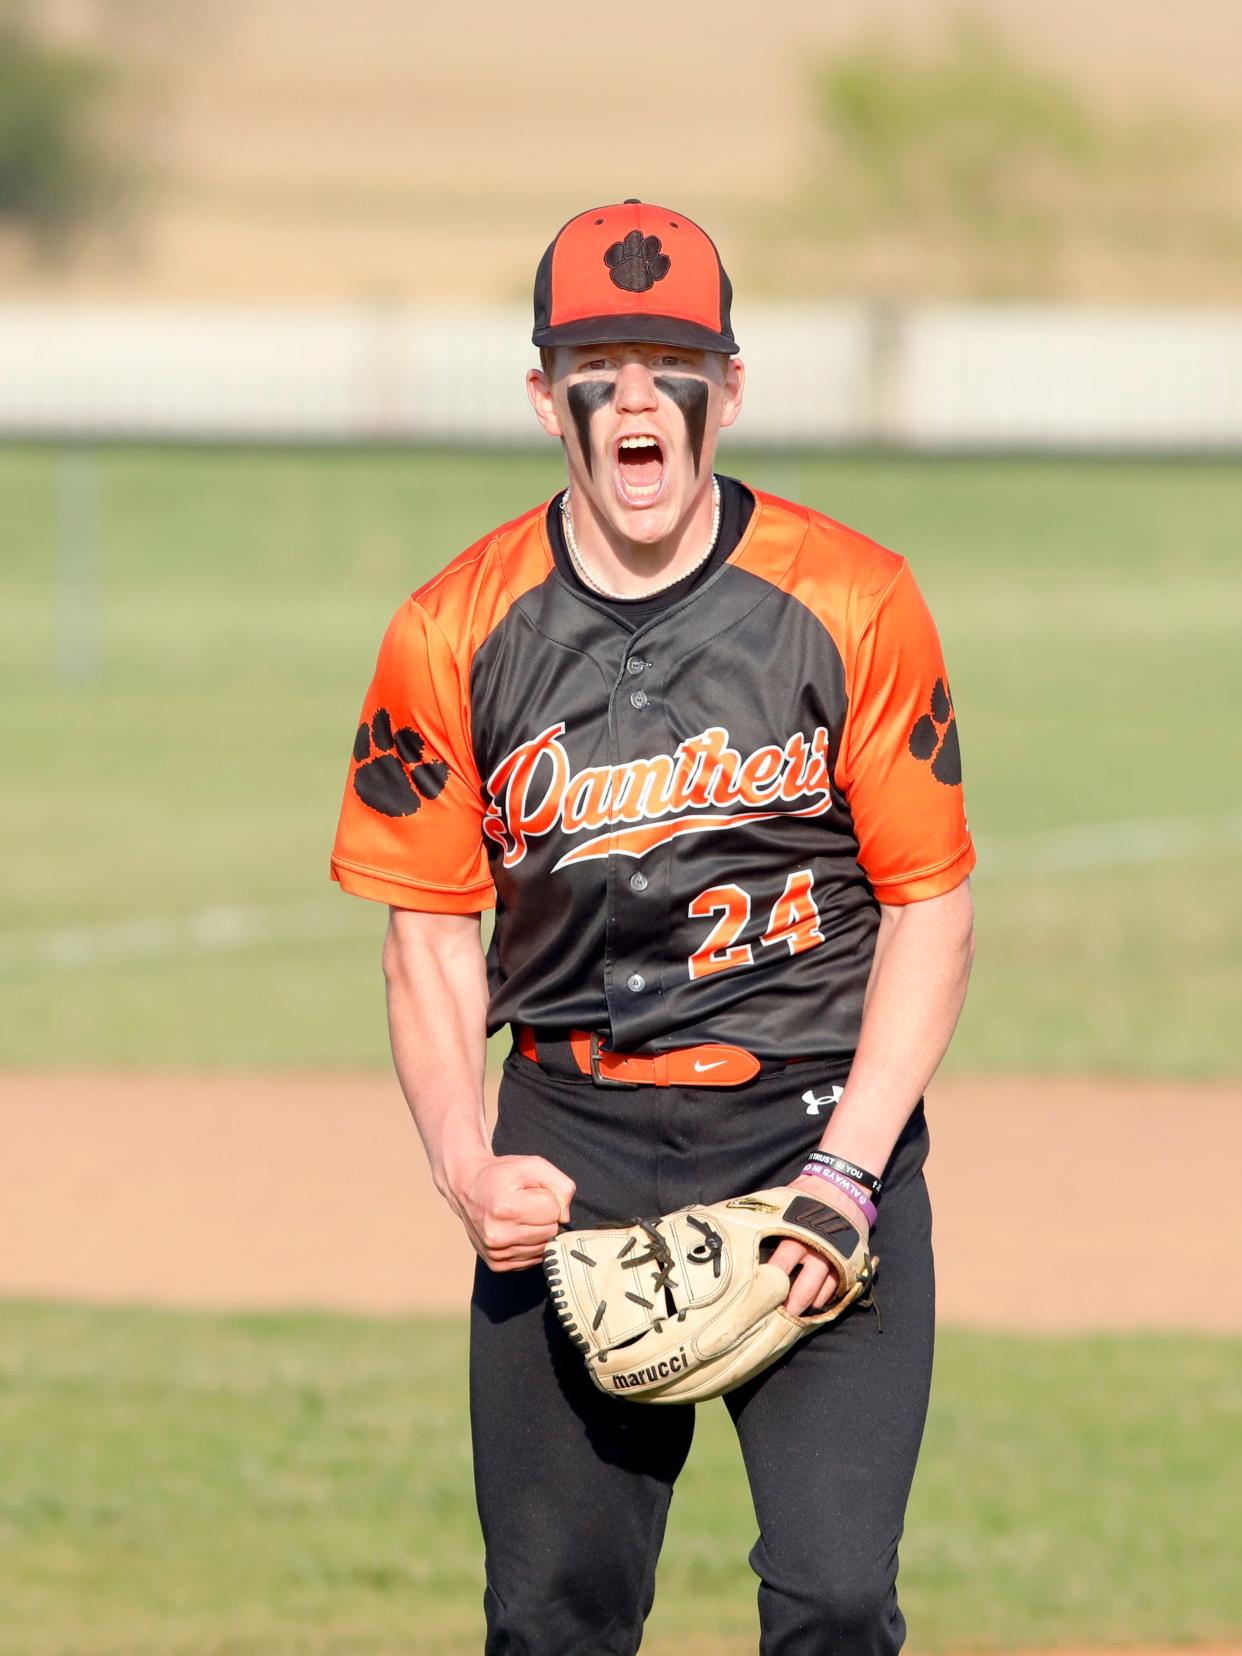 New Lexington pitcher Garrett Blosser celebrates after striking out the final batter he faced in a 5-4 win against host Sheridan on Wednesday in Thornville. Blosser pitched 2 1/3 scoreless innings to secure the save as the Panthers won their seventh straight game.